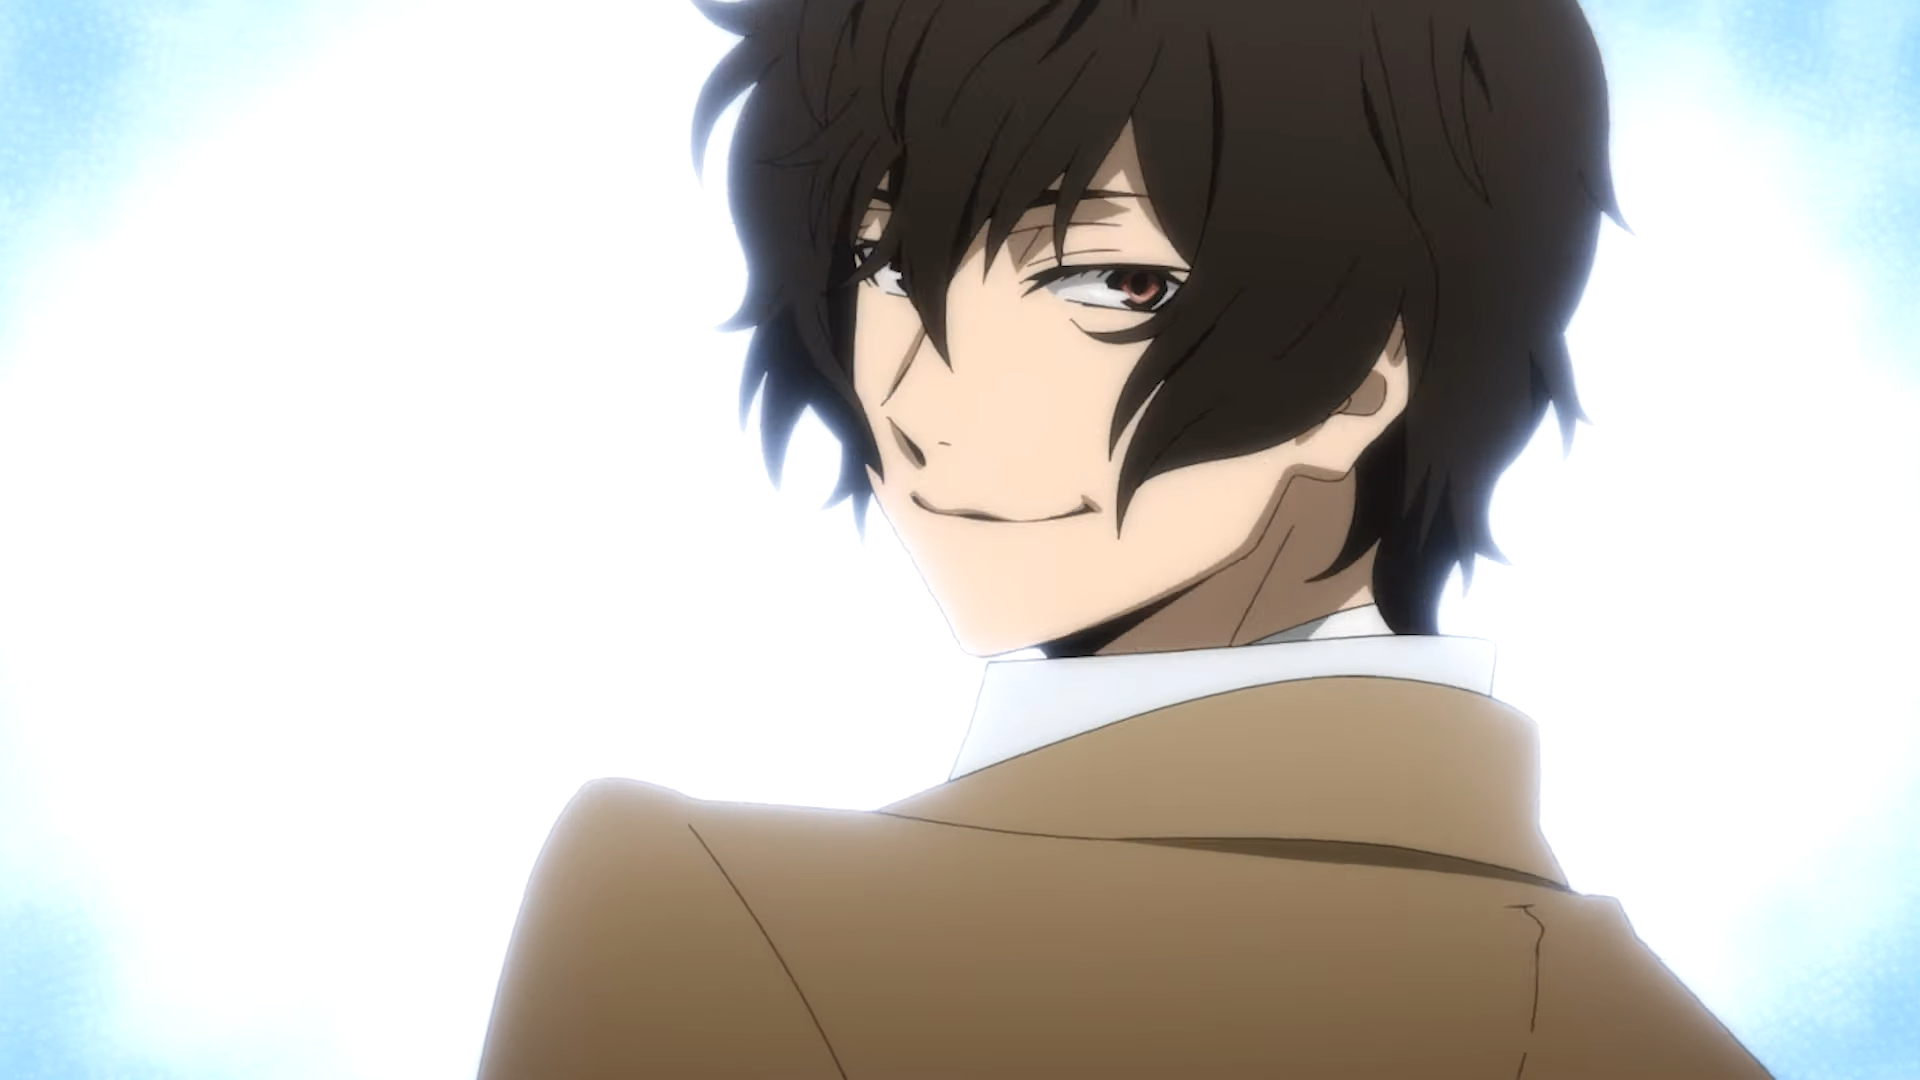 Bungo Stray Dogs season 5 release date, cast, latest news and trailer